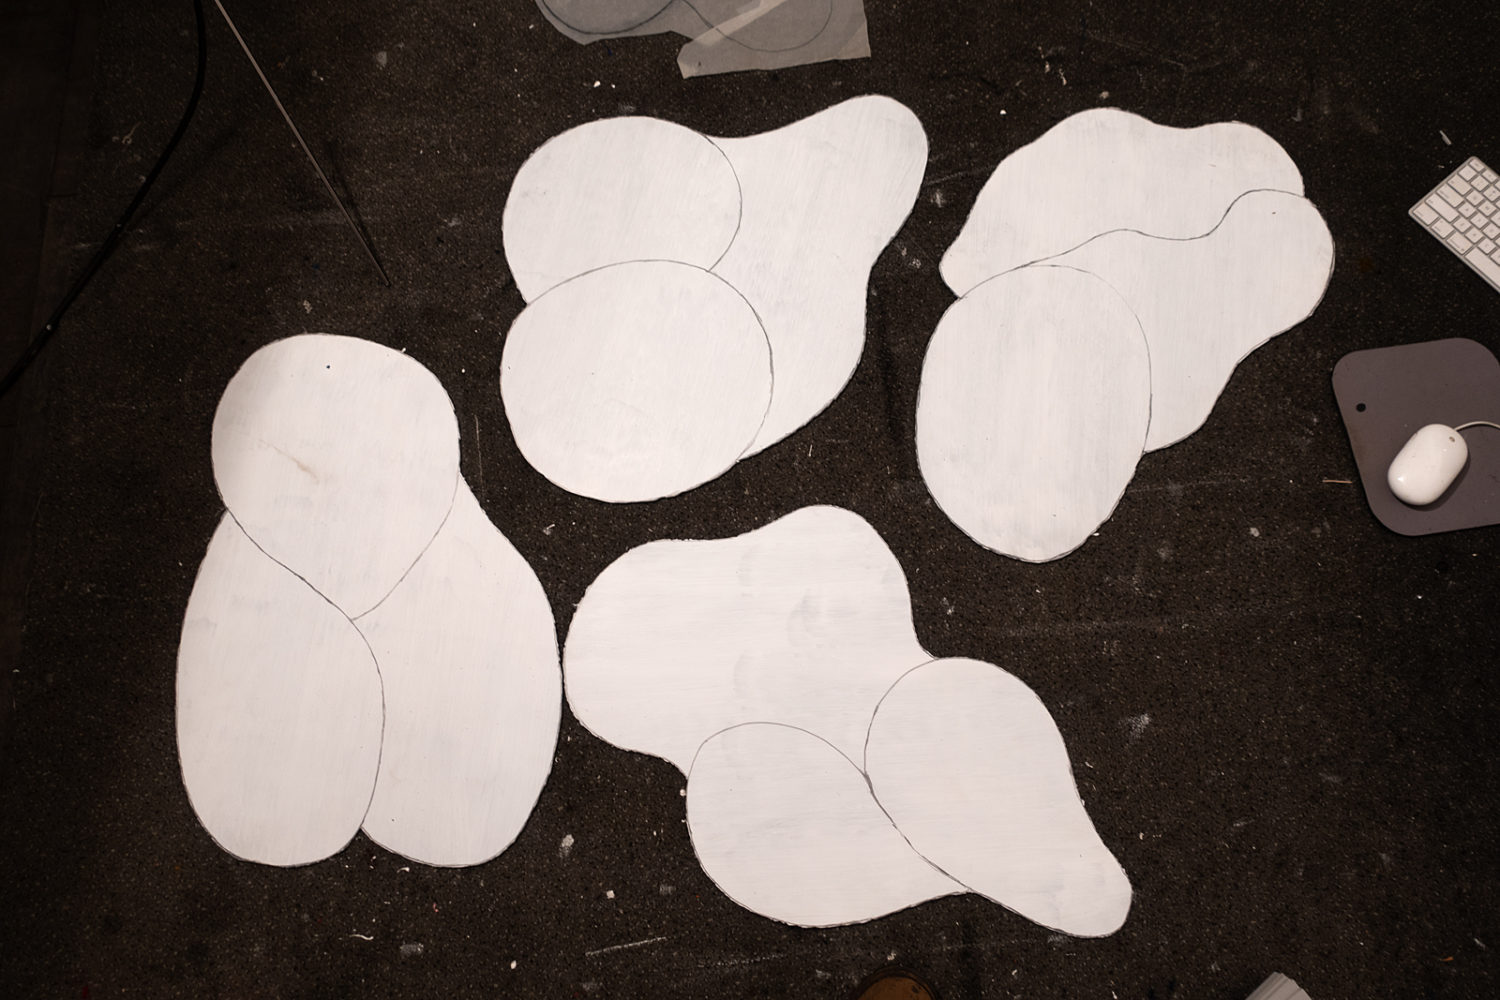 Four forms drawings on cut plastic